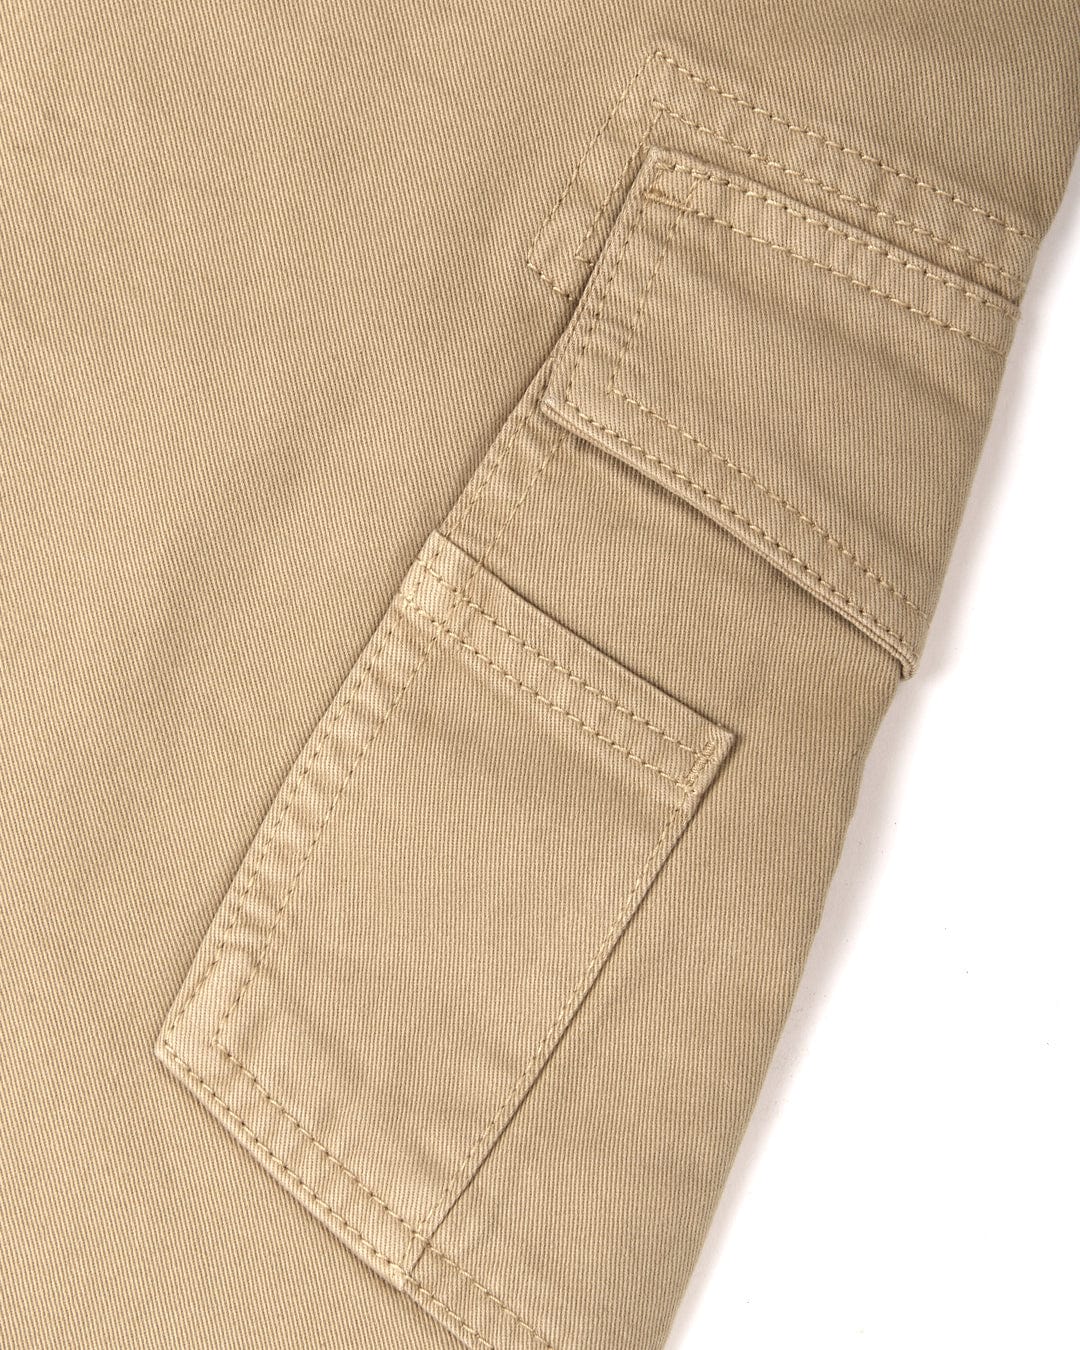 Close-up of Penwith II - Mens Cargo Shorts - Cream cotton material with a stitched pocket by Saltrock.